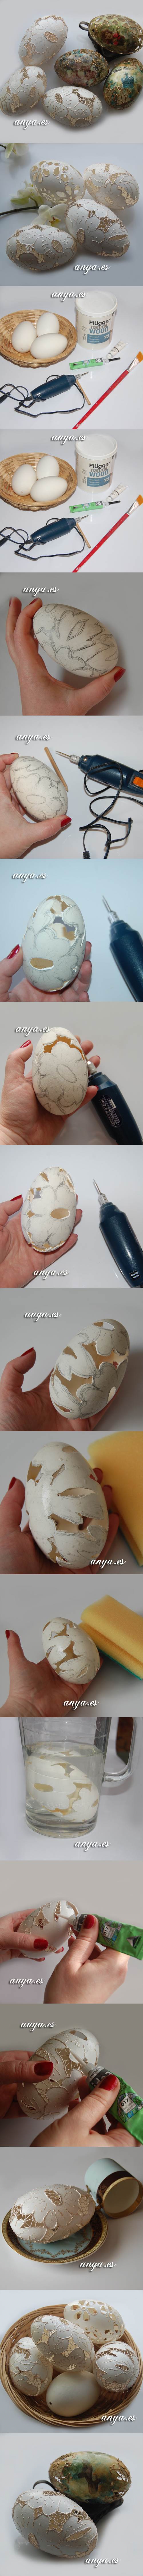 DIY Carved Lace Easter Eggs 2